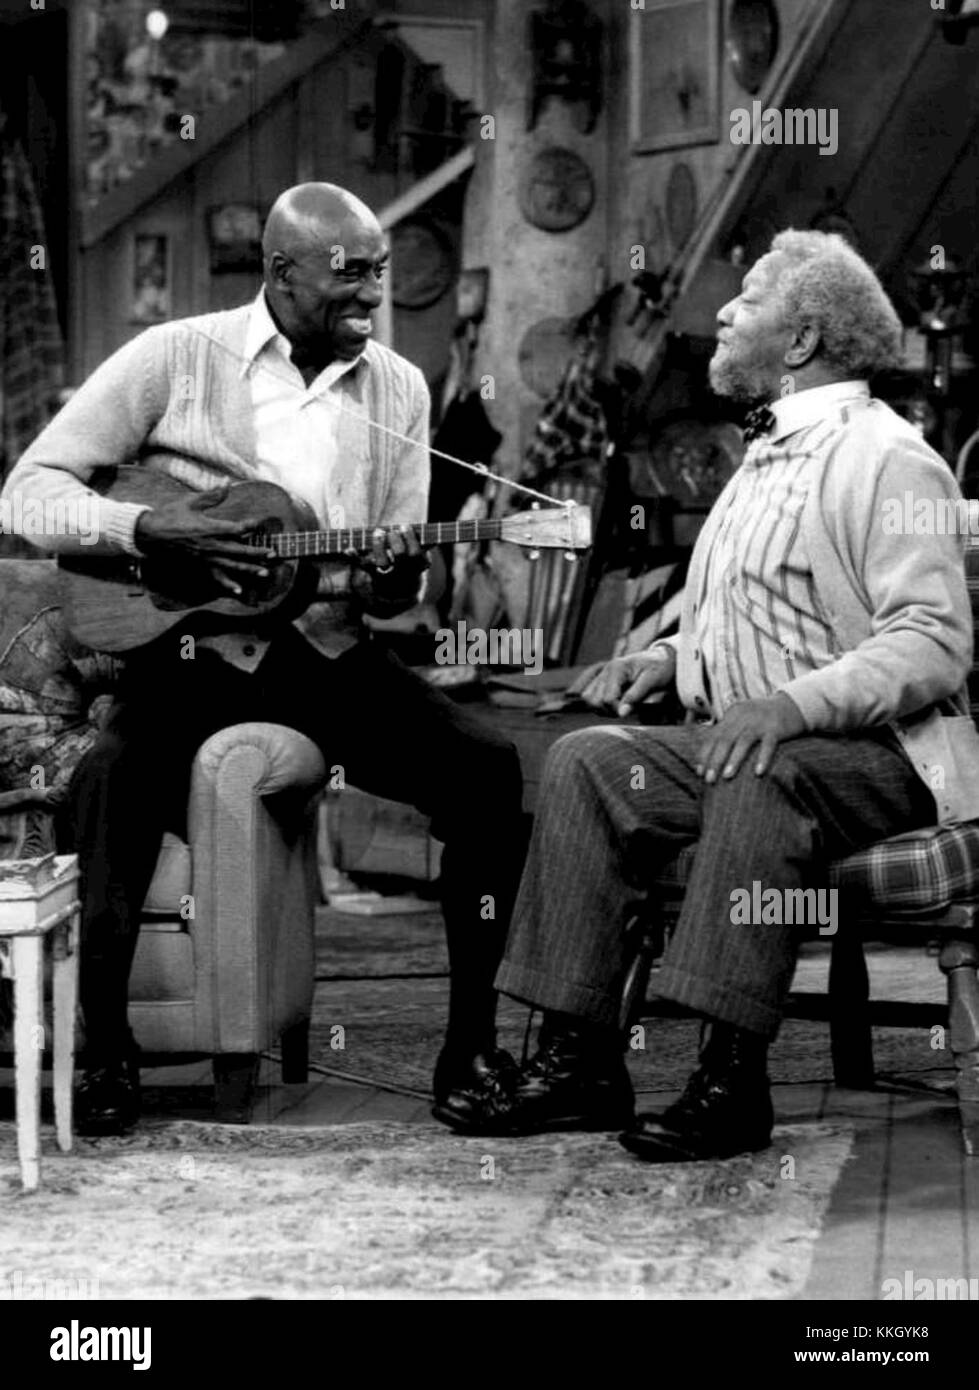 Scatman Crothers Redd Foxx Sanford and Son 1975 Stock Photo